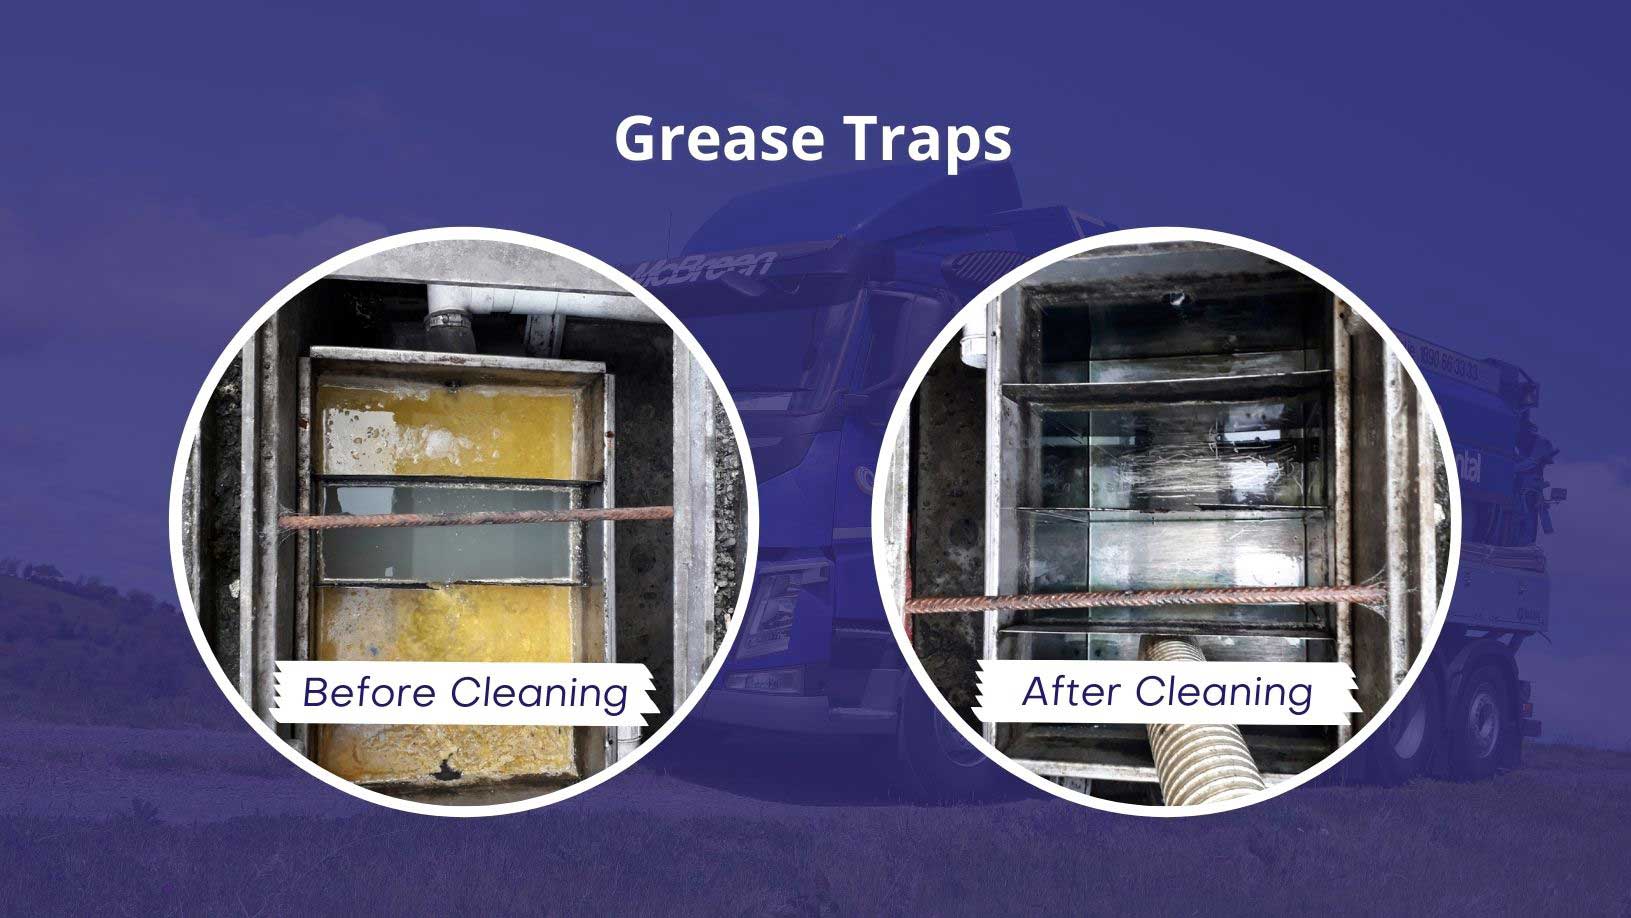 Grease Traps before and after cleaning